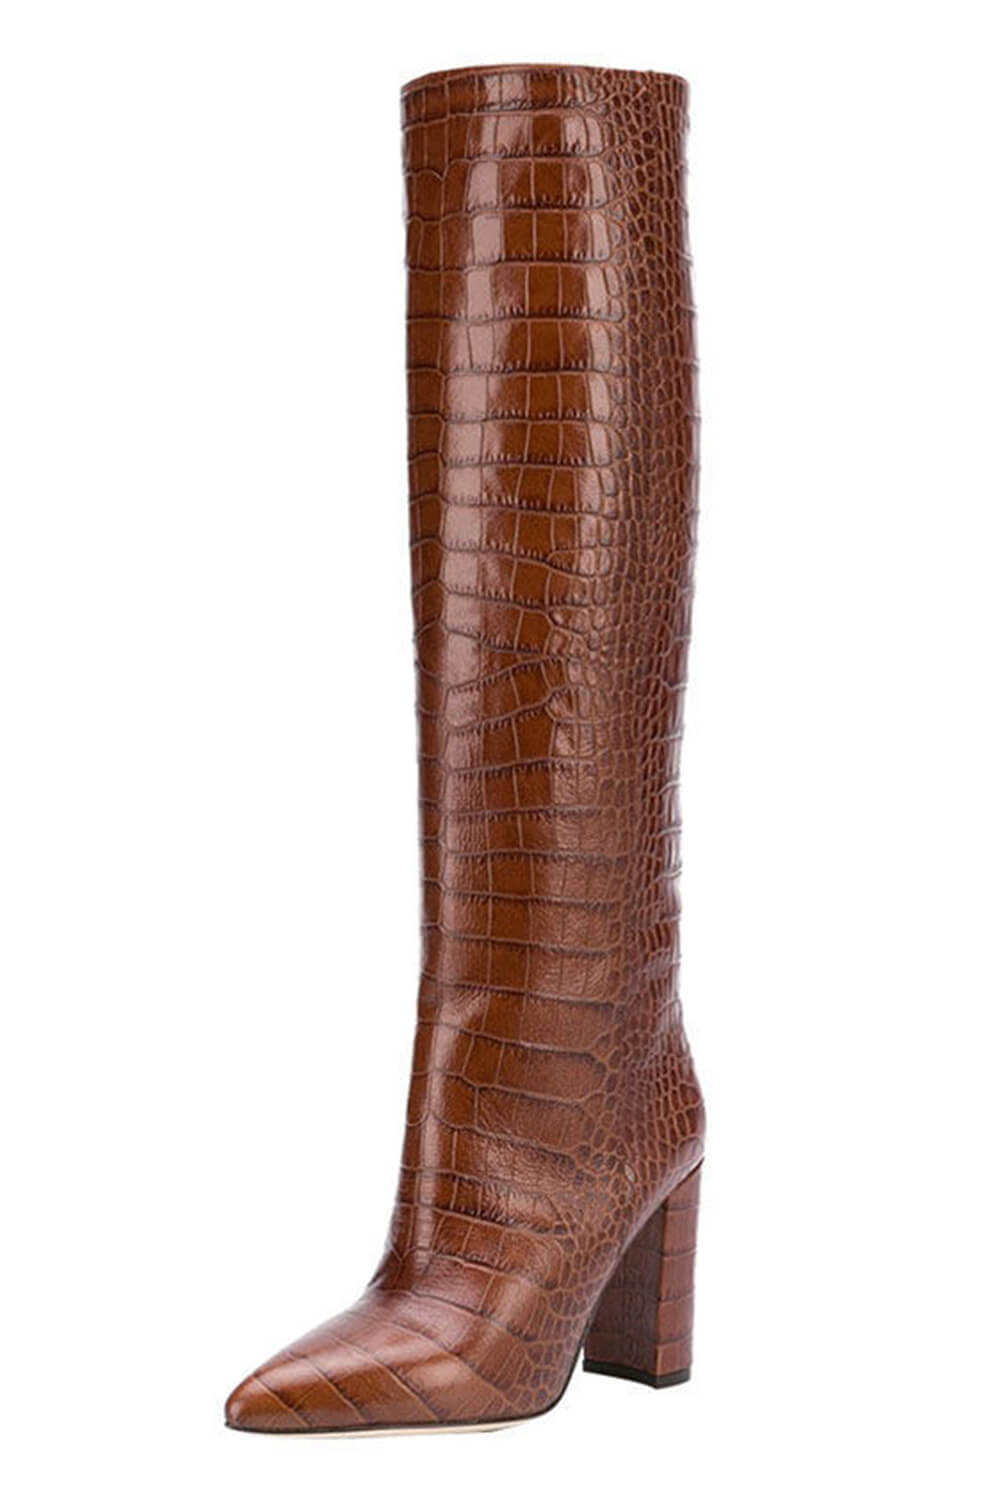 Croc-Effect Faux Leather Pointed Toe Block Heel Knee-High Boots - Brown